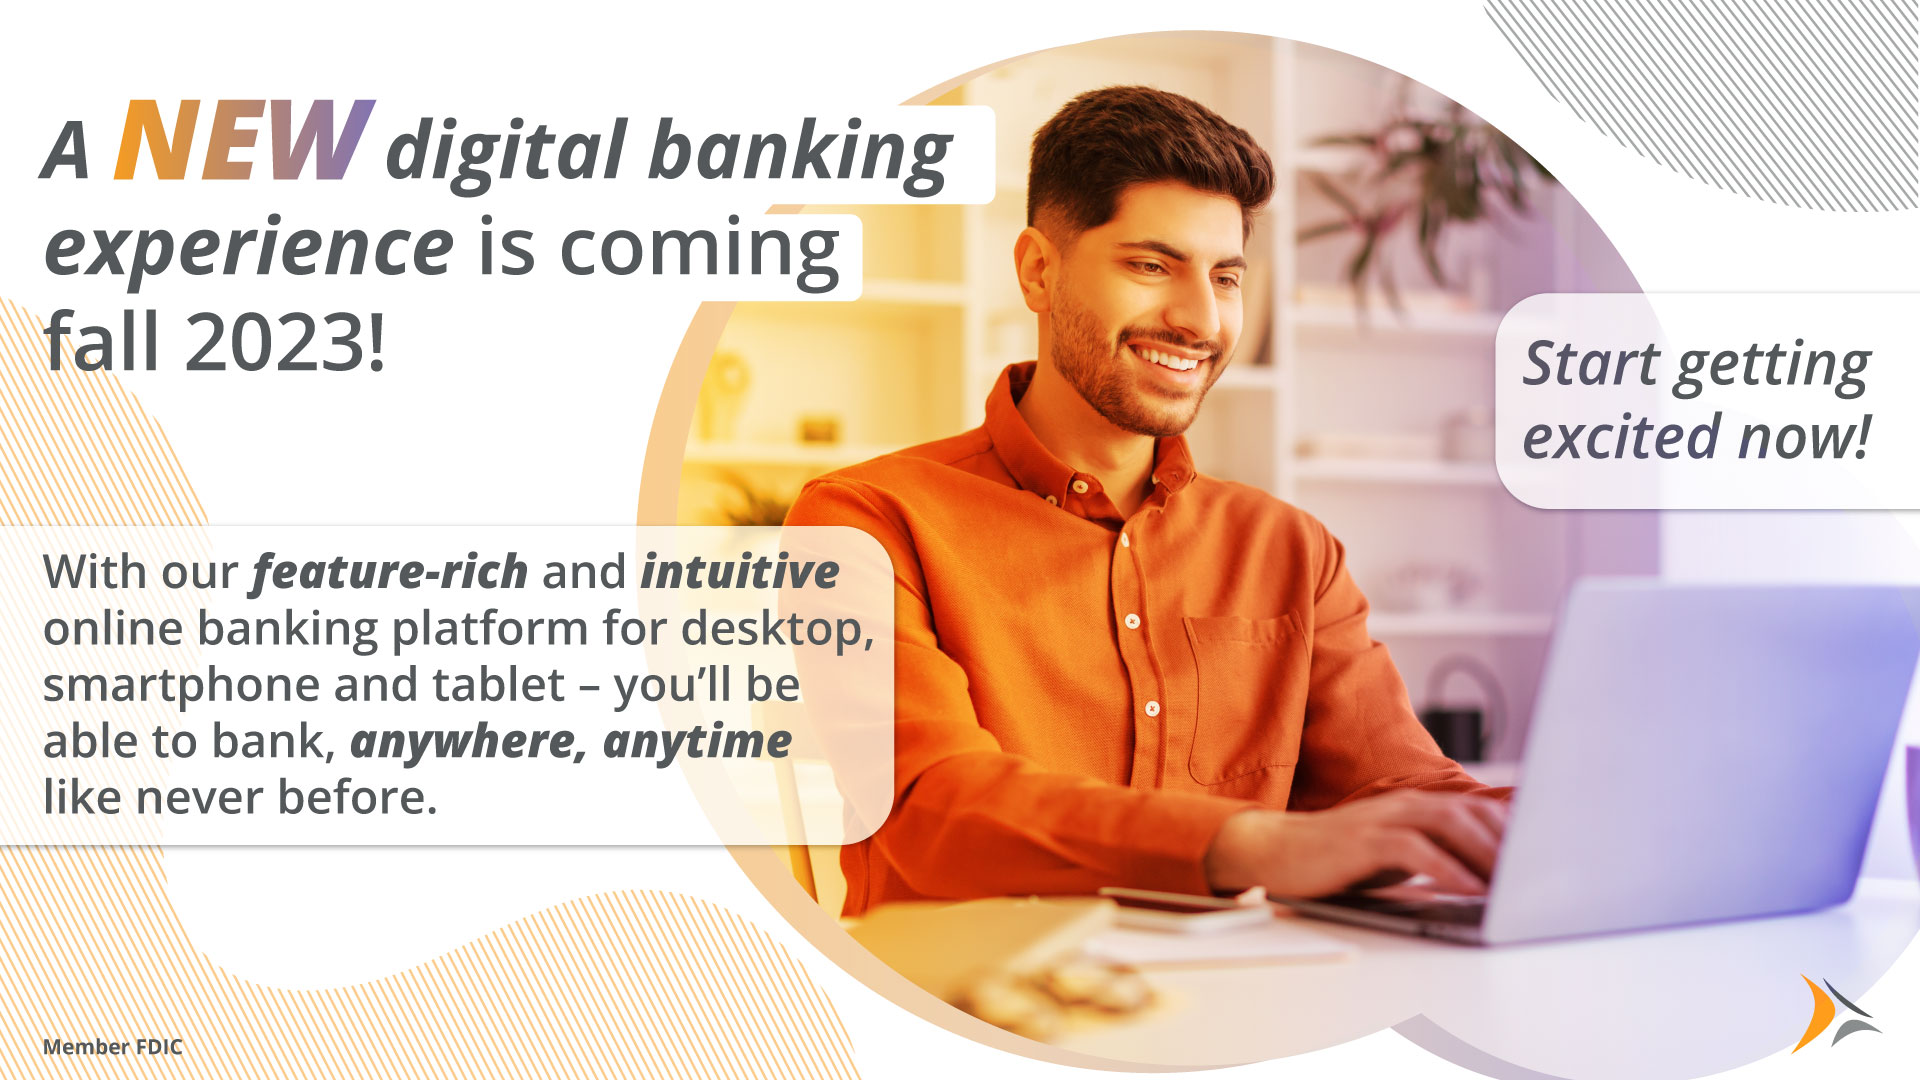 A NEW digital banking experience is coming fall 2023! With our feature-rich and intuitive online banking platform for your desktop, smartphone and tablet - you'll be able to bank, anywhere, anytime like never before.  Start getting excited now!